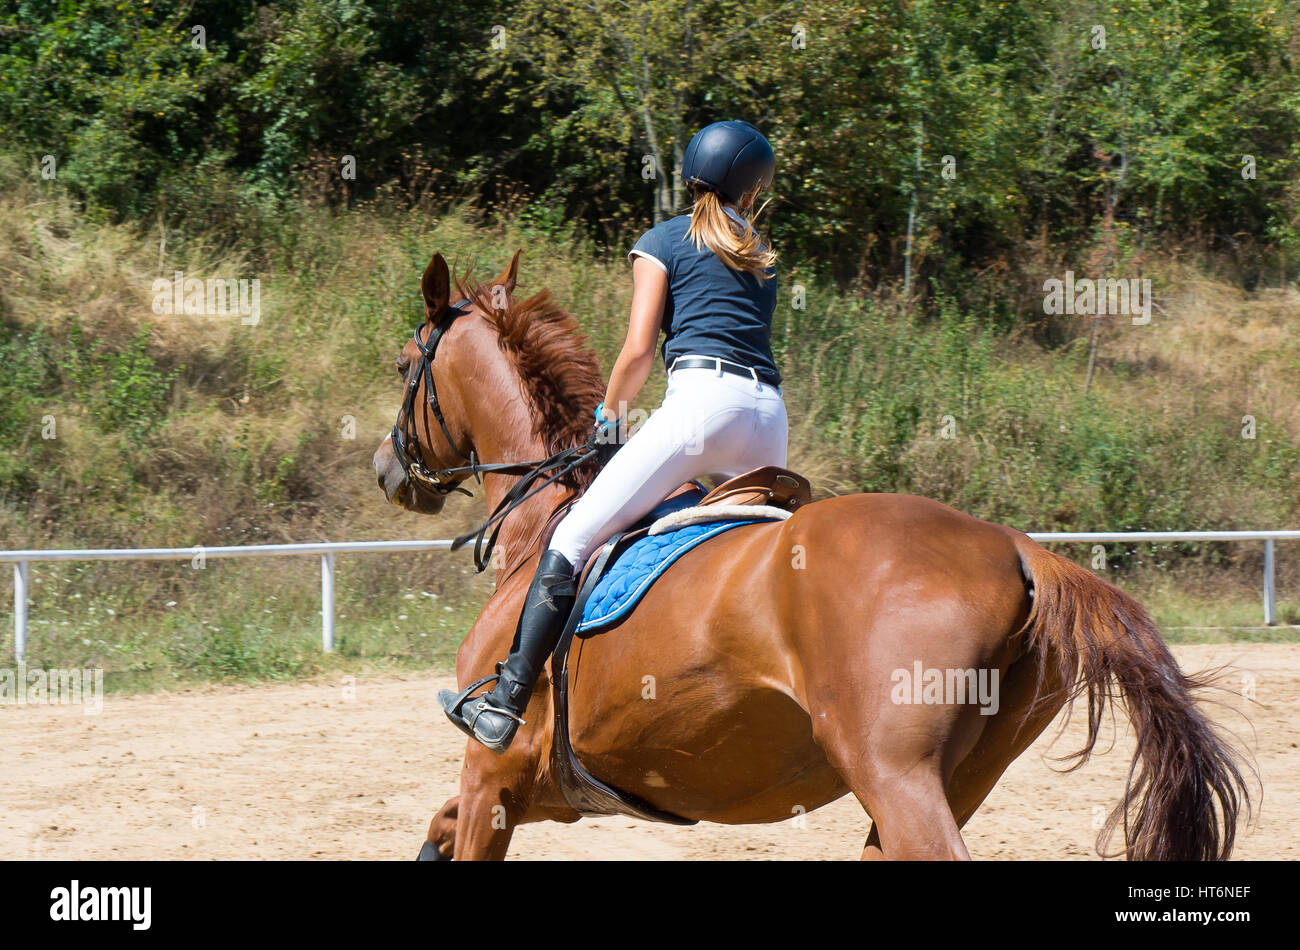 Entertainment with horseback riding. Horse ride at leisure. Stock Photo